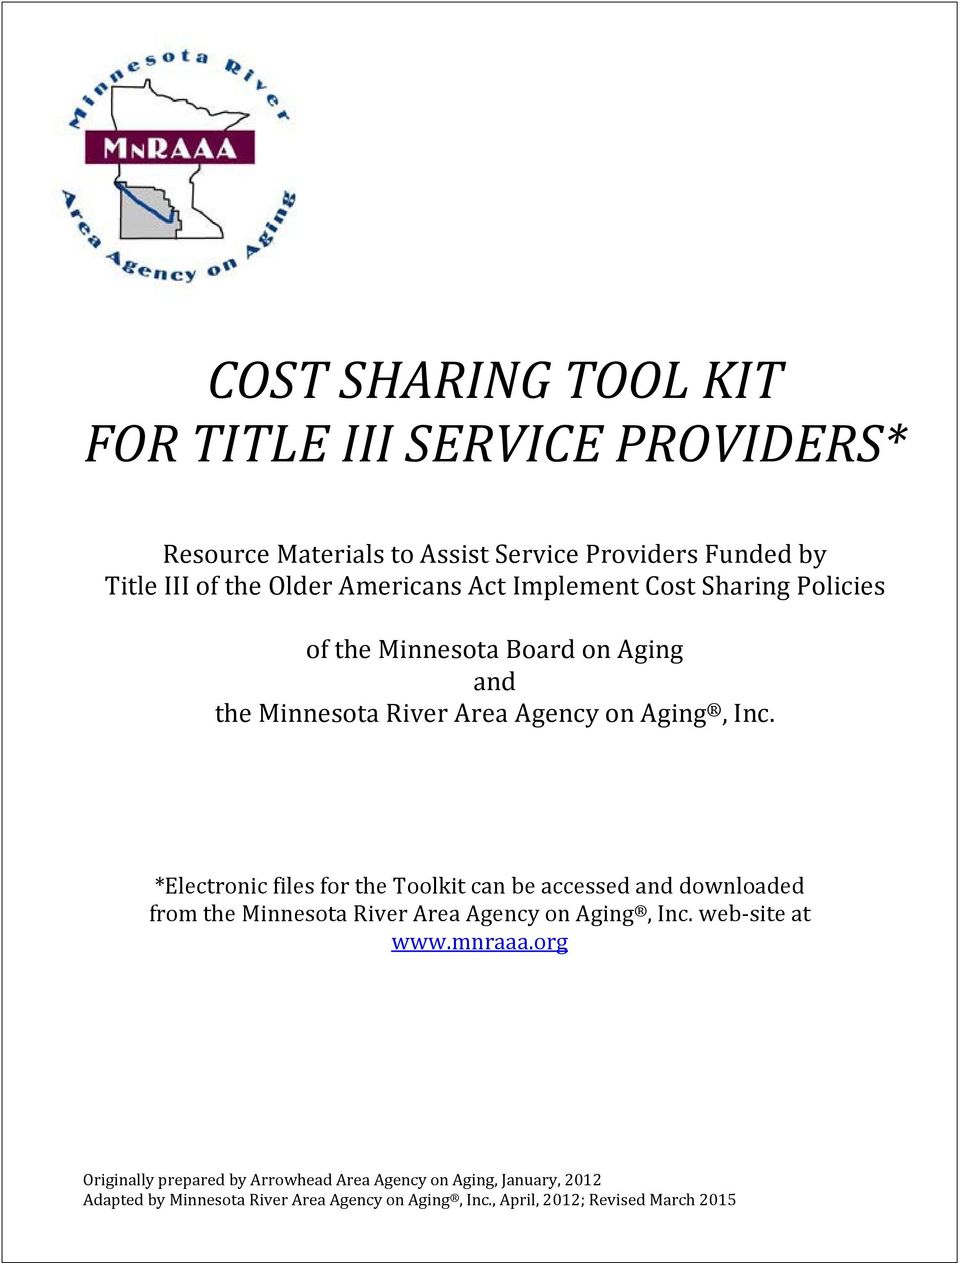 *Electronic files for the Toolkit can be accessed and downloaded from the Minnesota River Area Agency on Aging, Inc. web-site at www.mnraaa.